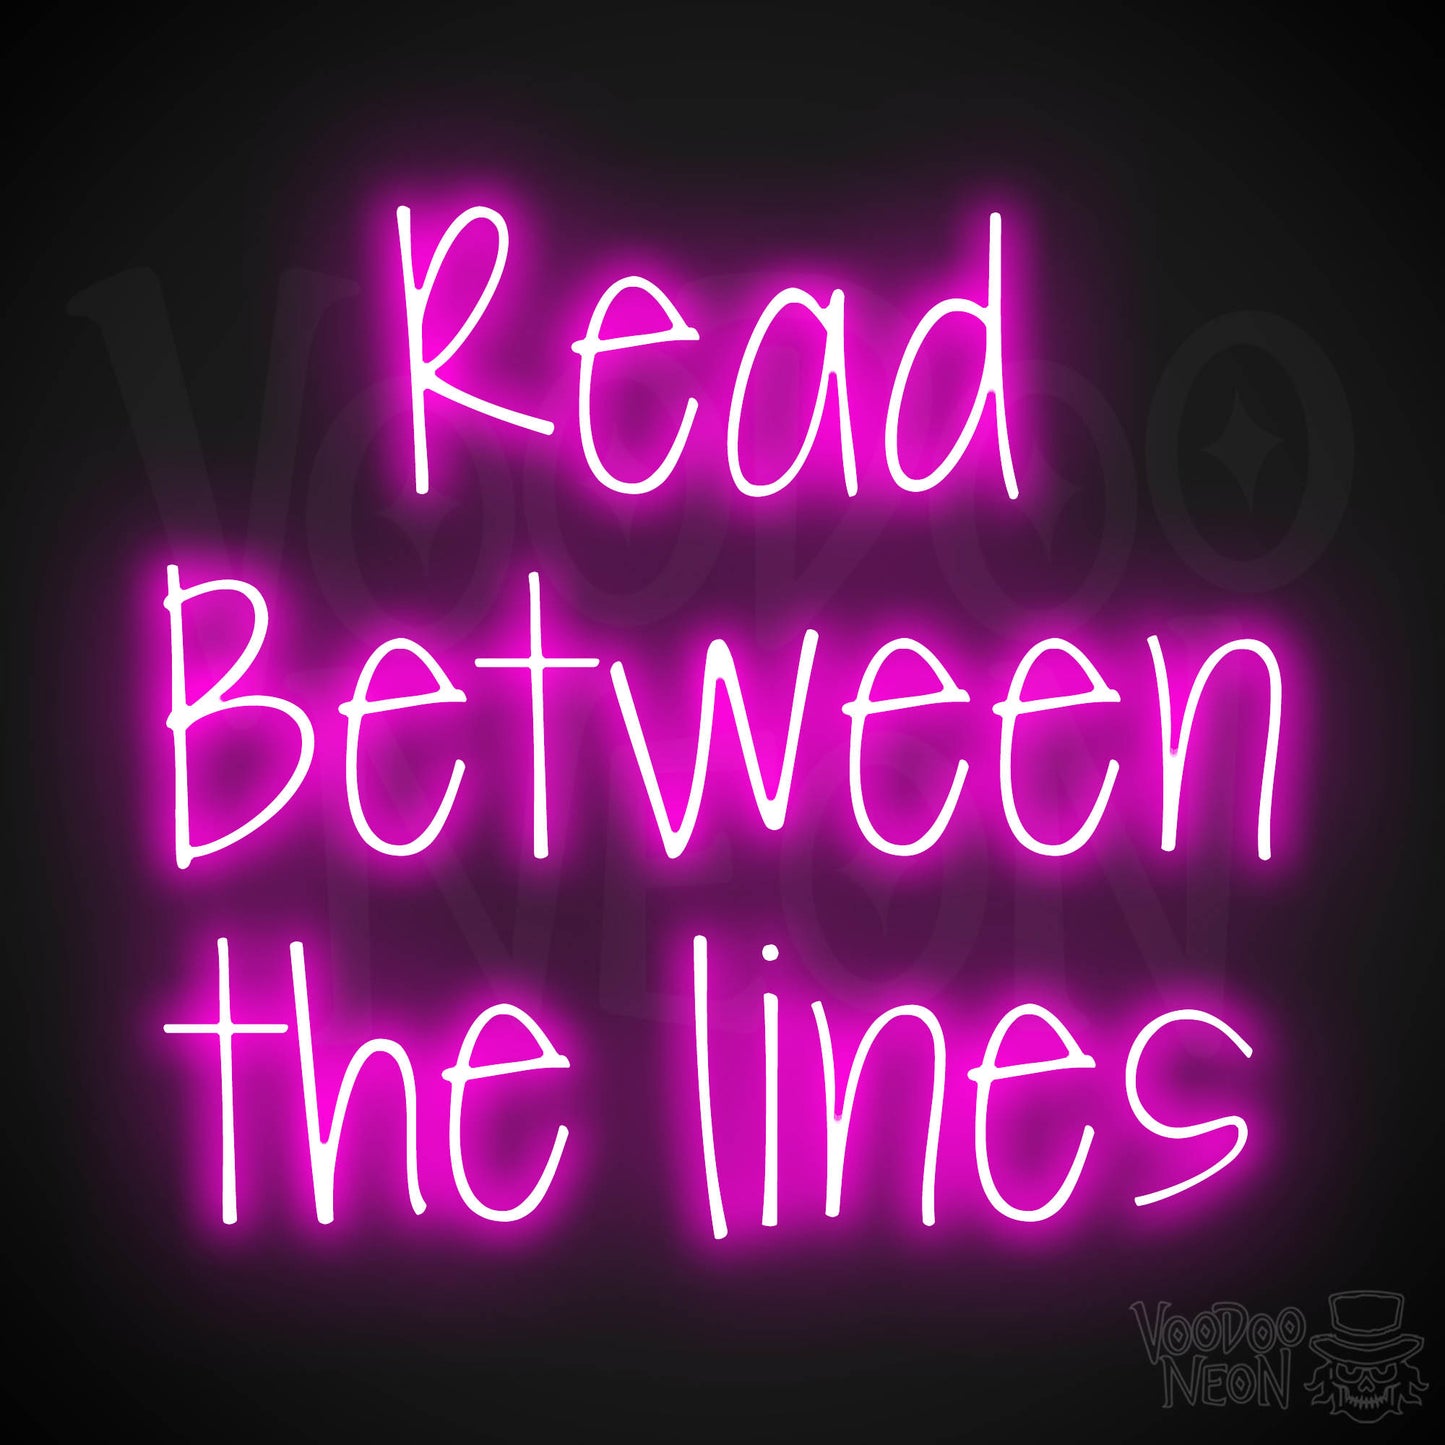 Read Between The Lines LED Neon - Pink